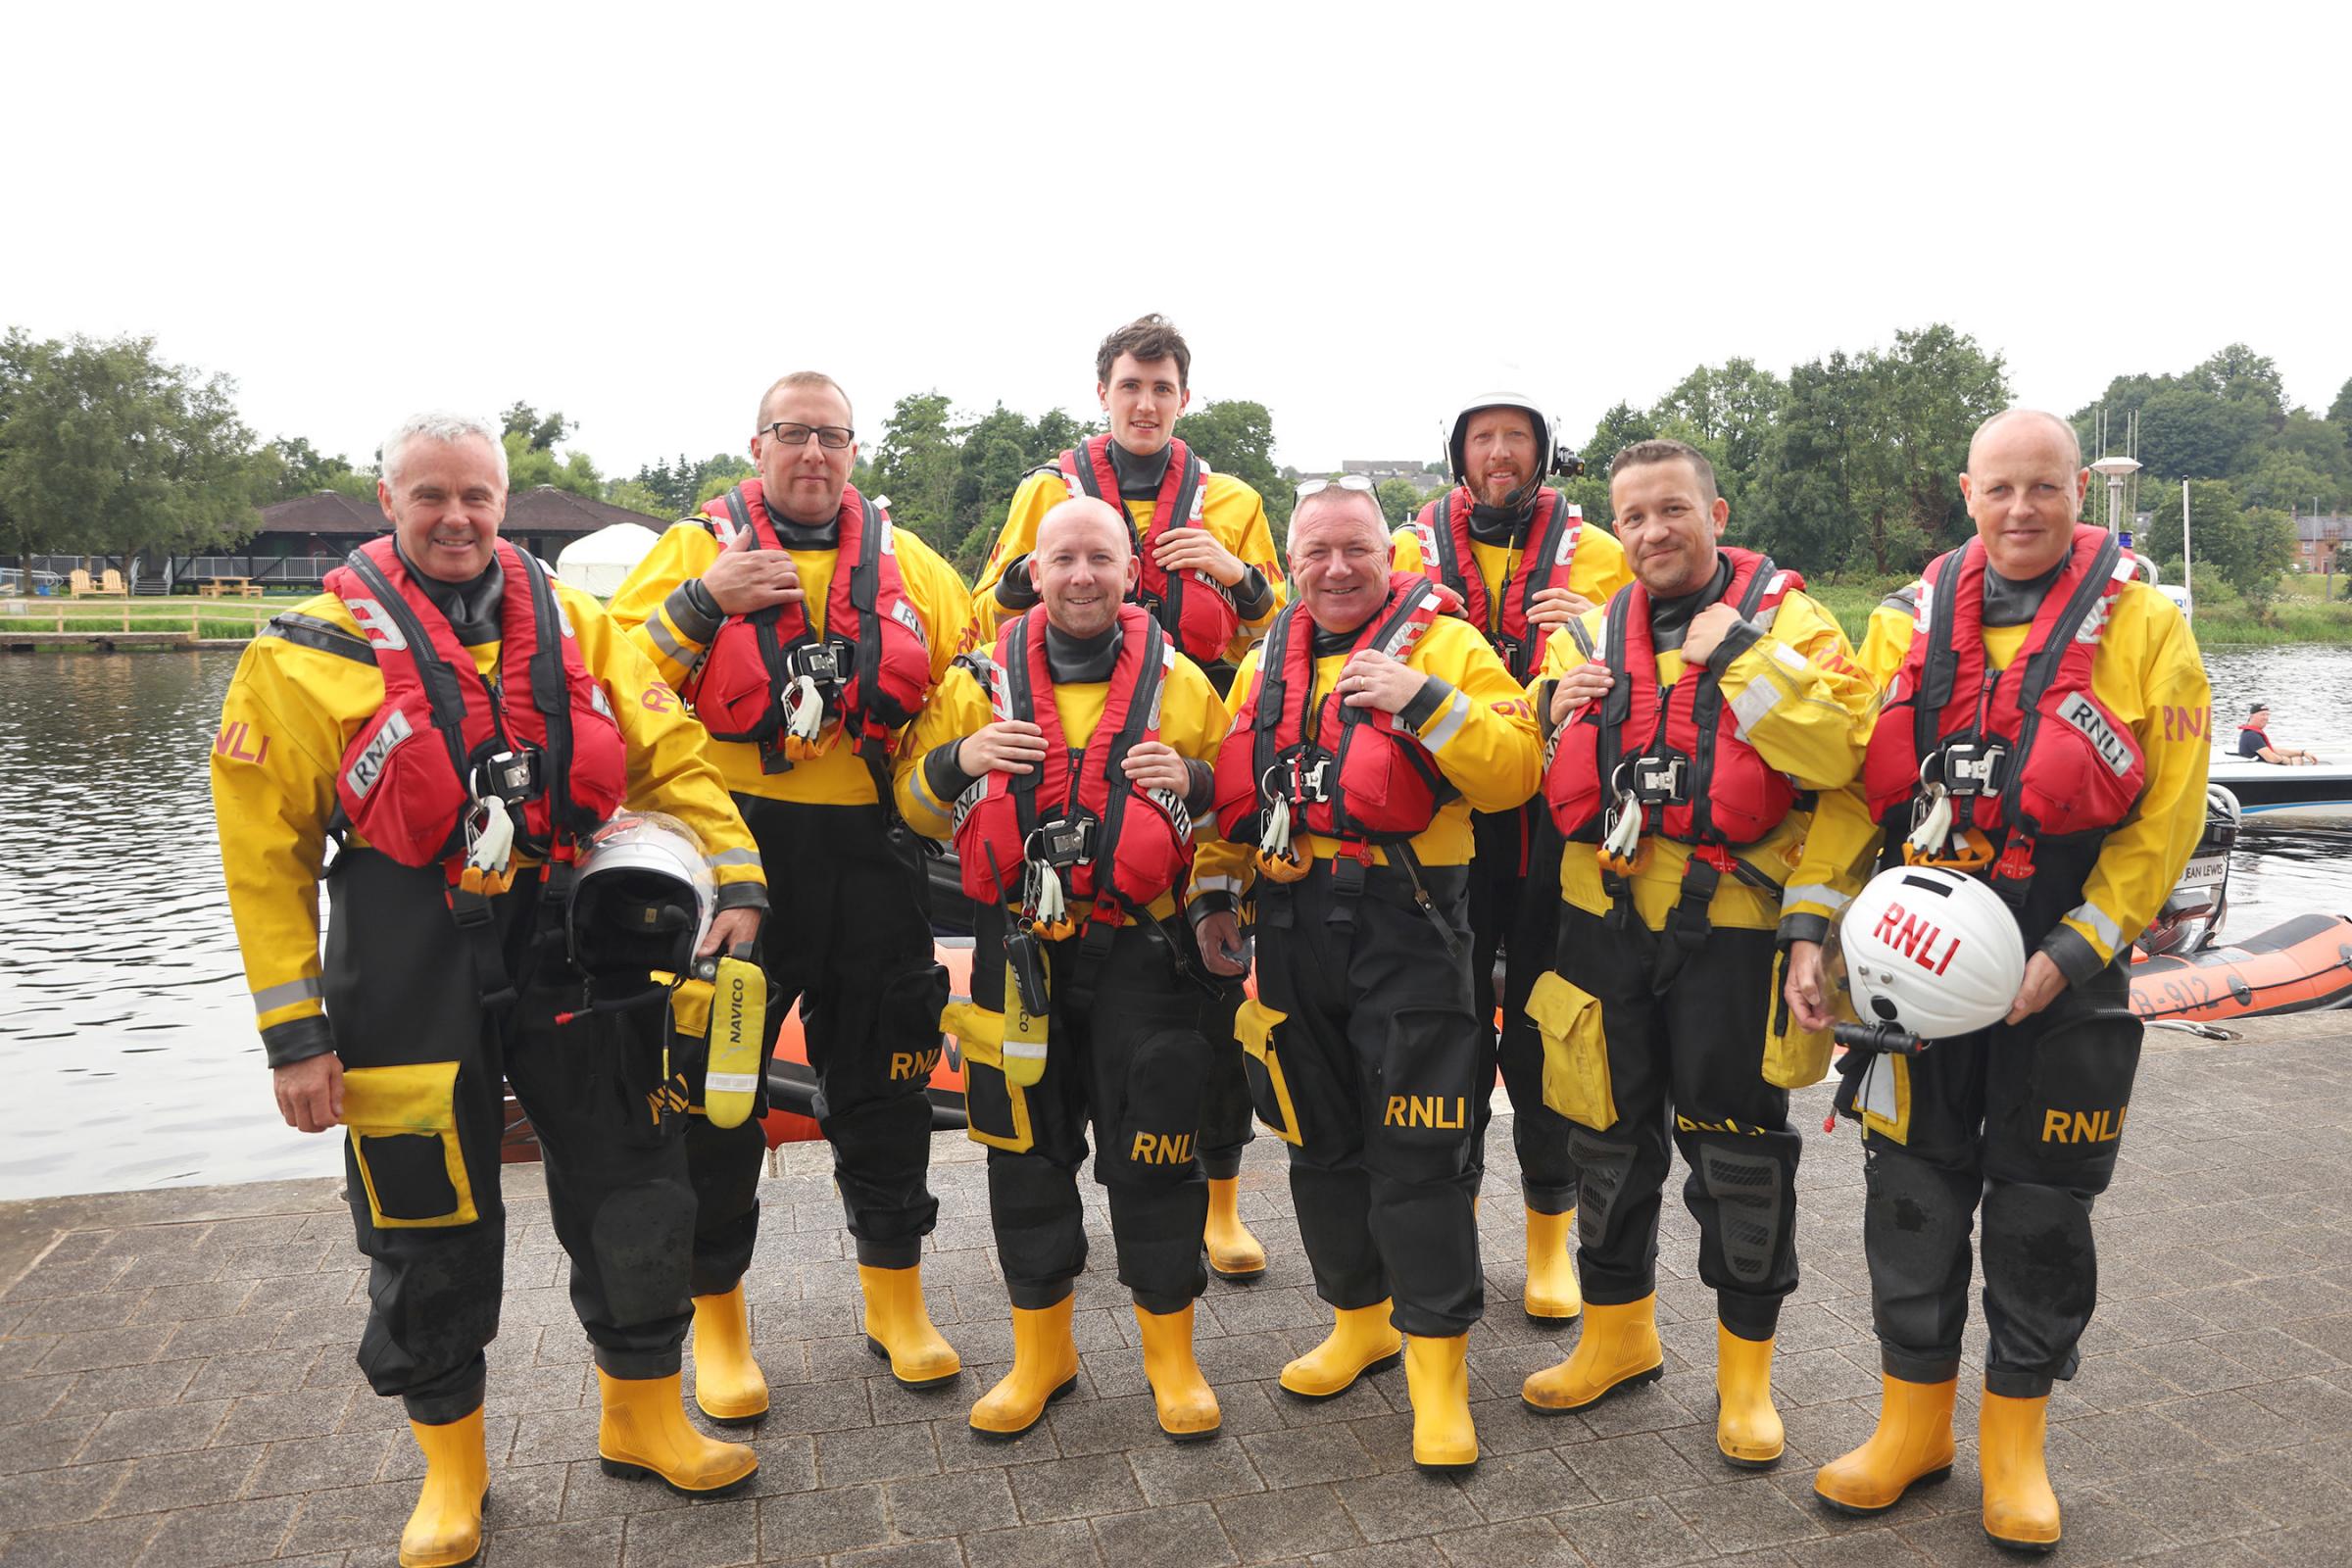 Members of the RNLI who were on the lake to keep an eye on the swimmers, back row Joe Donnelly and Barry Flanagan. Front row, Davy Reid, Richard McFarland, Stevi Ingrim, Killian Creggan, Seamus McHugh and Chris Cathcart.